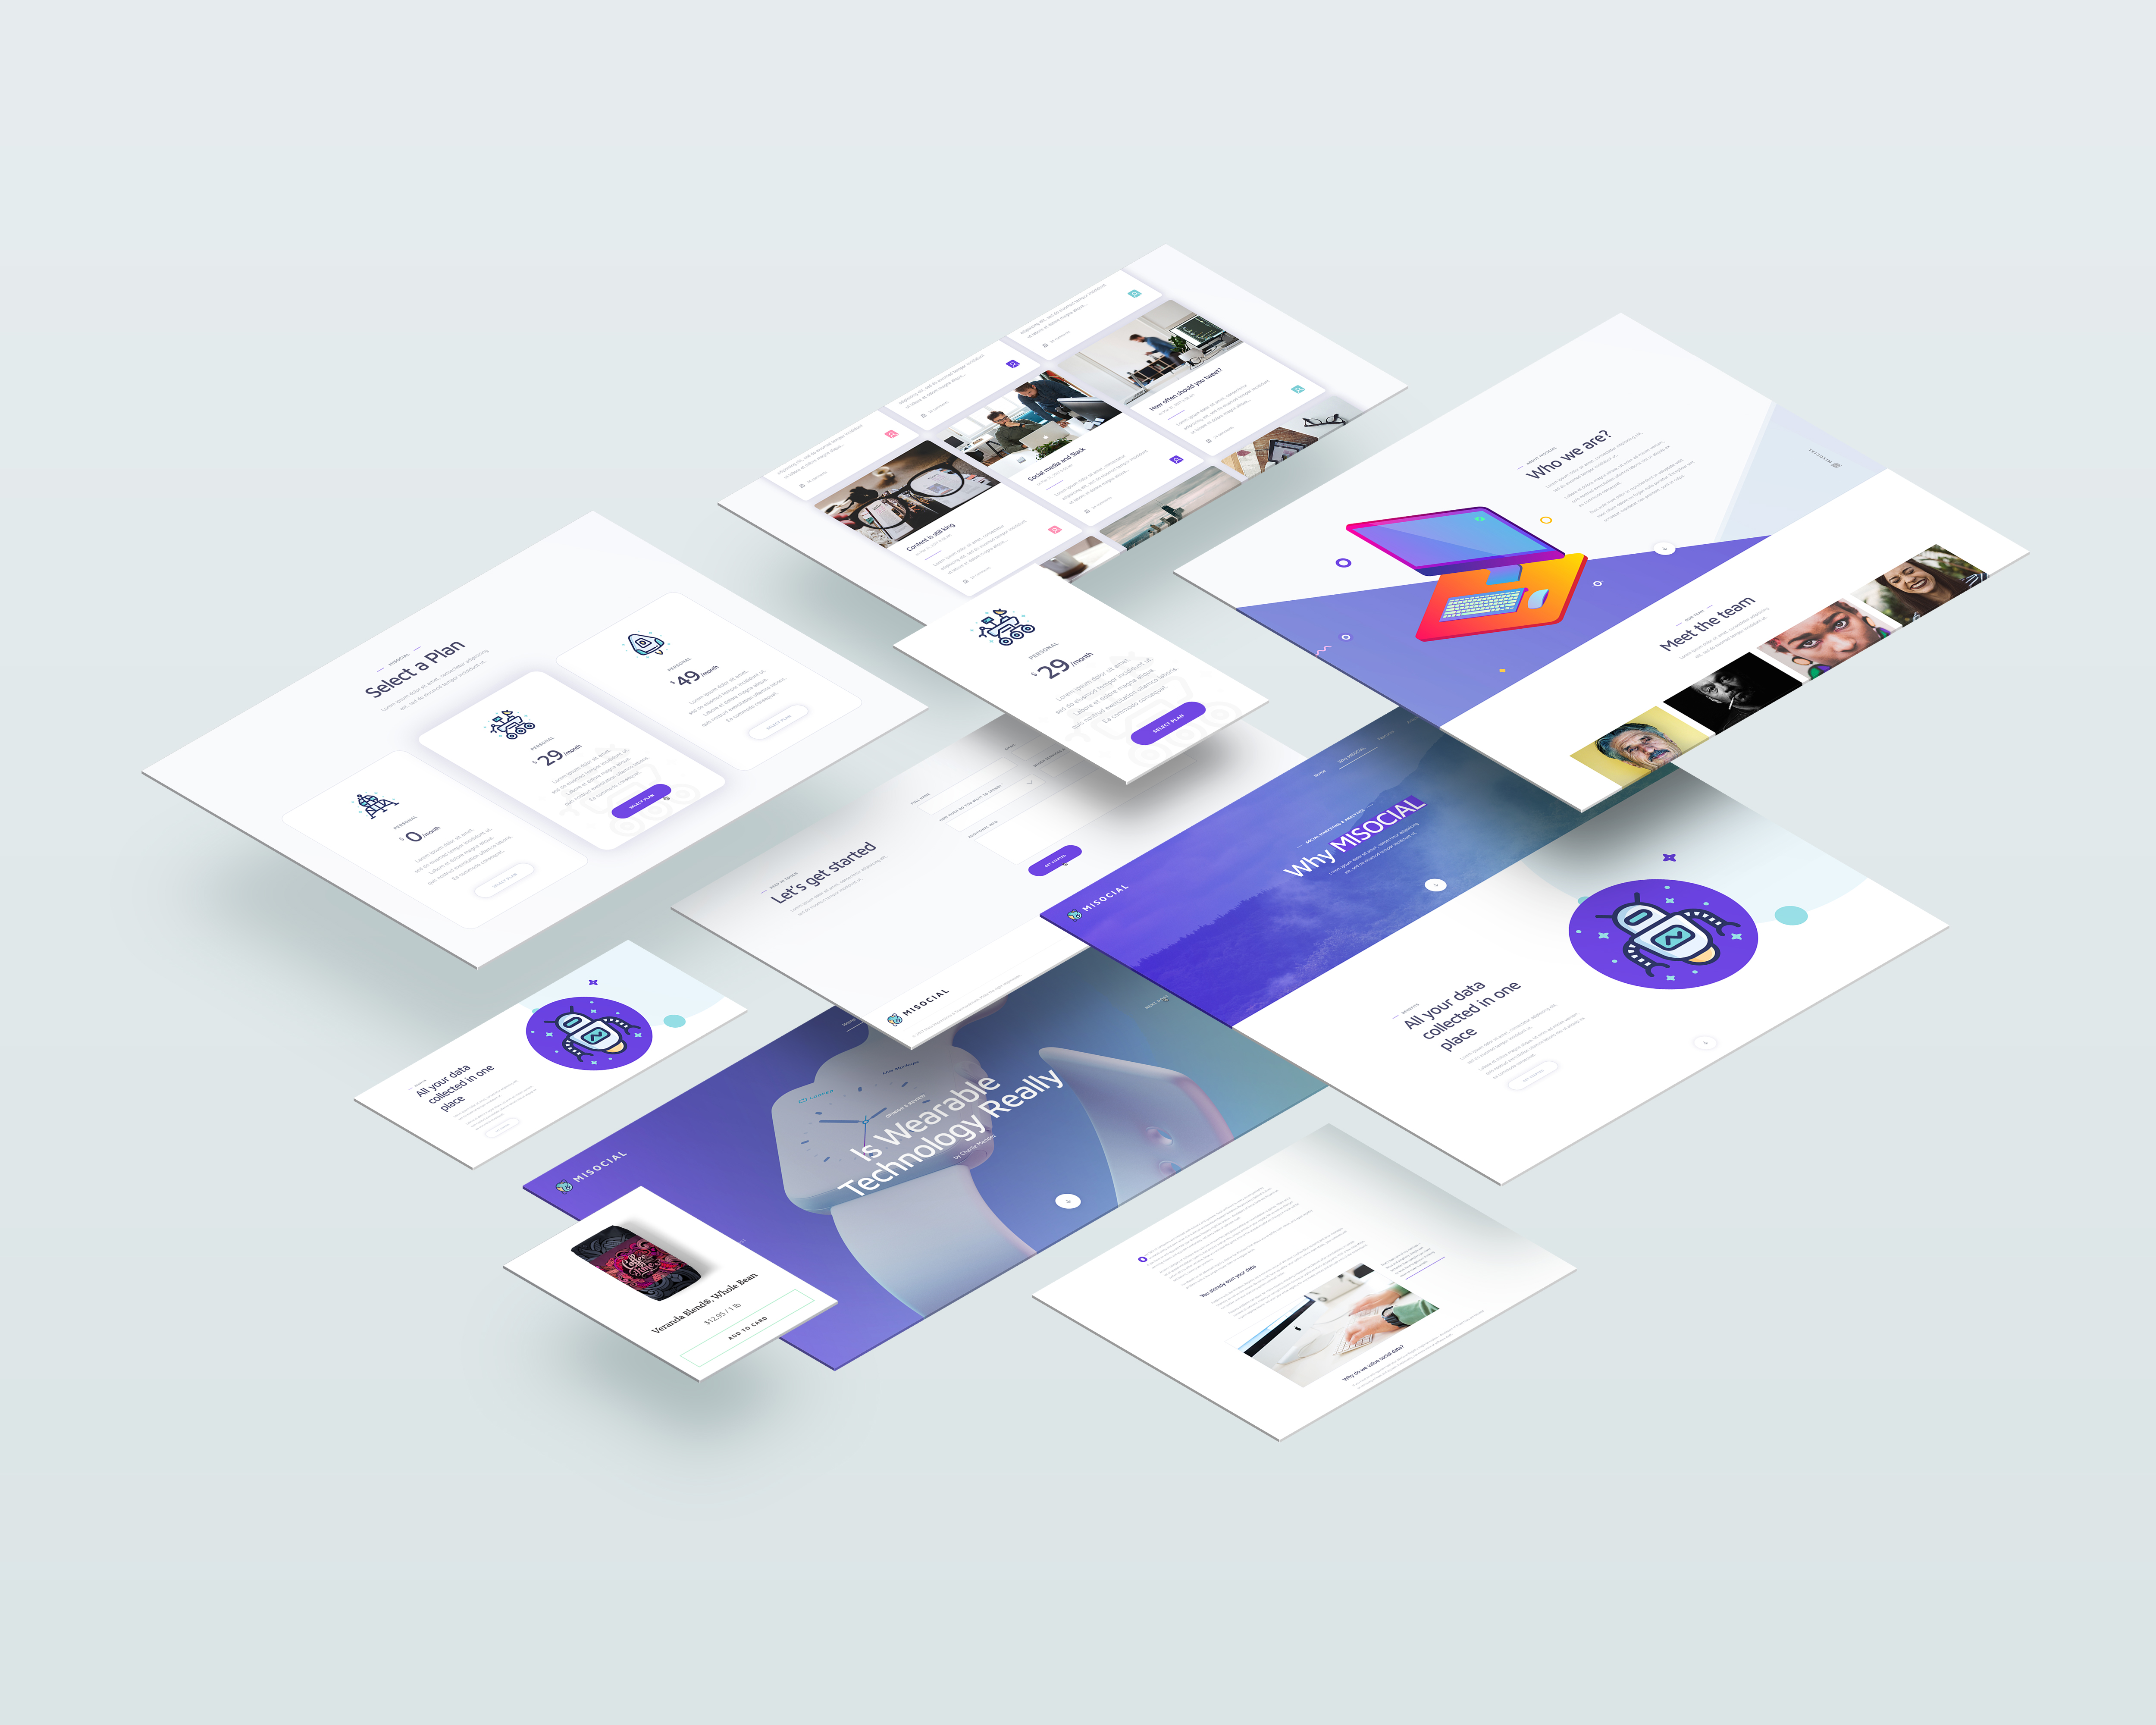 Dribbble Thesceens Mobileperspectivemockup3 Bytranmautritam